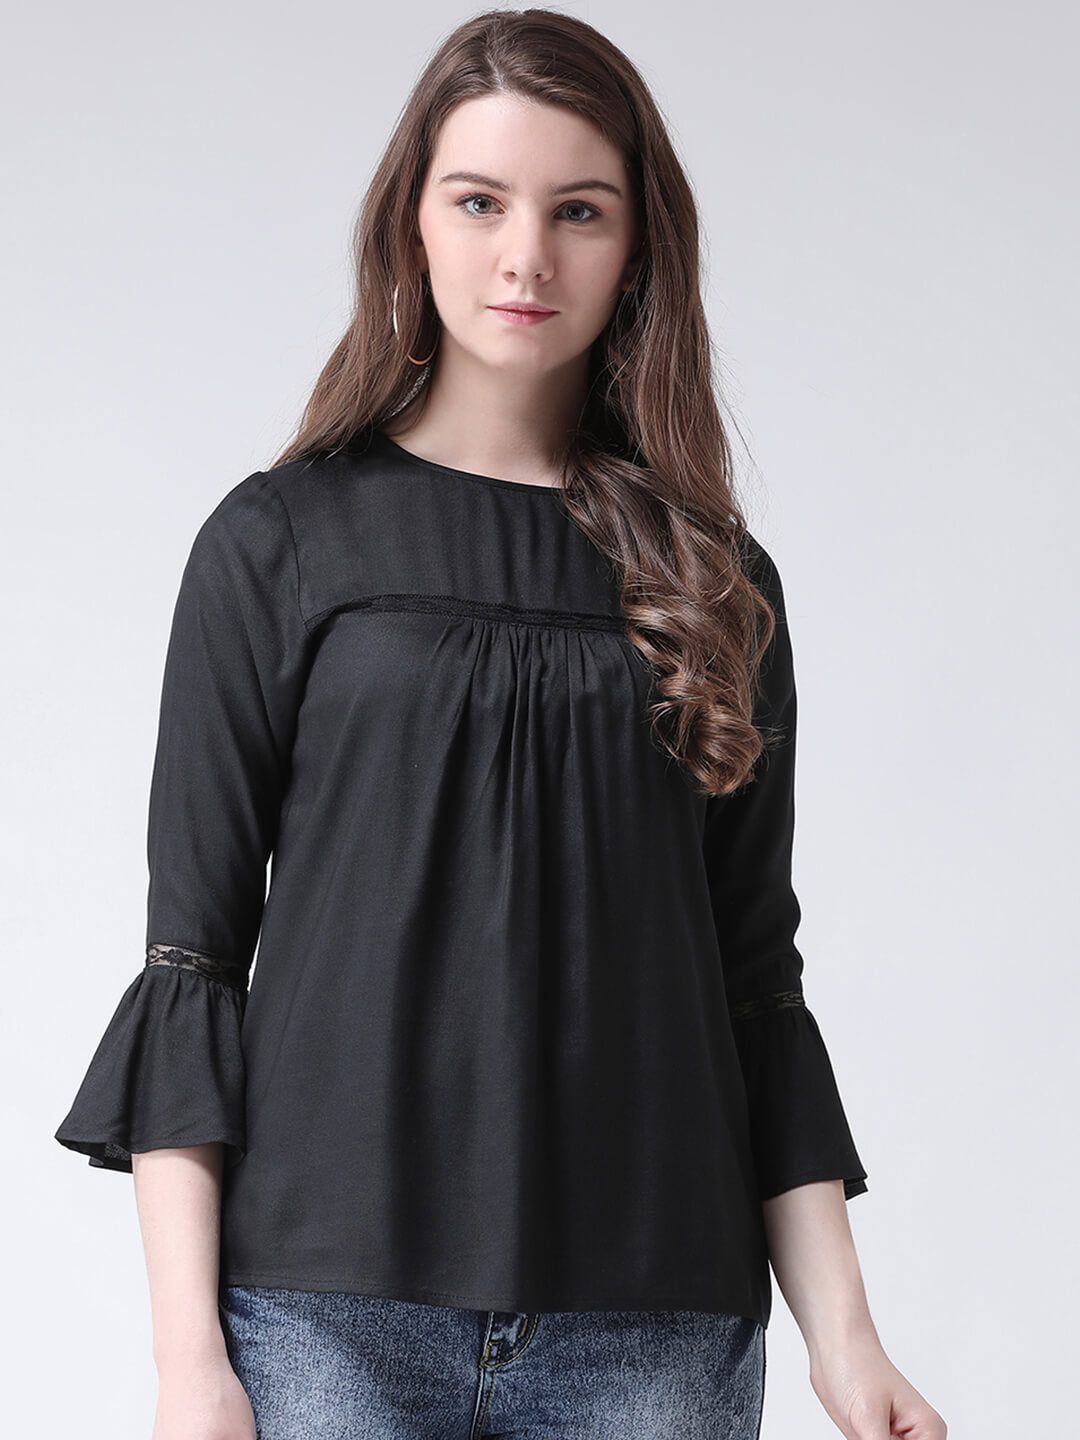 Women'S Black Rayon Blouse With Lace Insert Detail On The Yoke And Gathers Detail